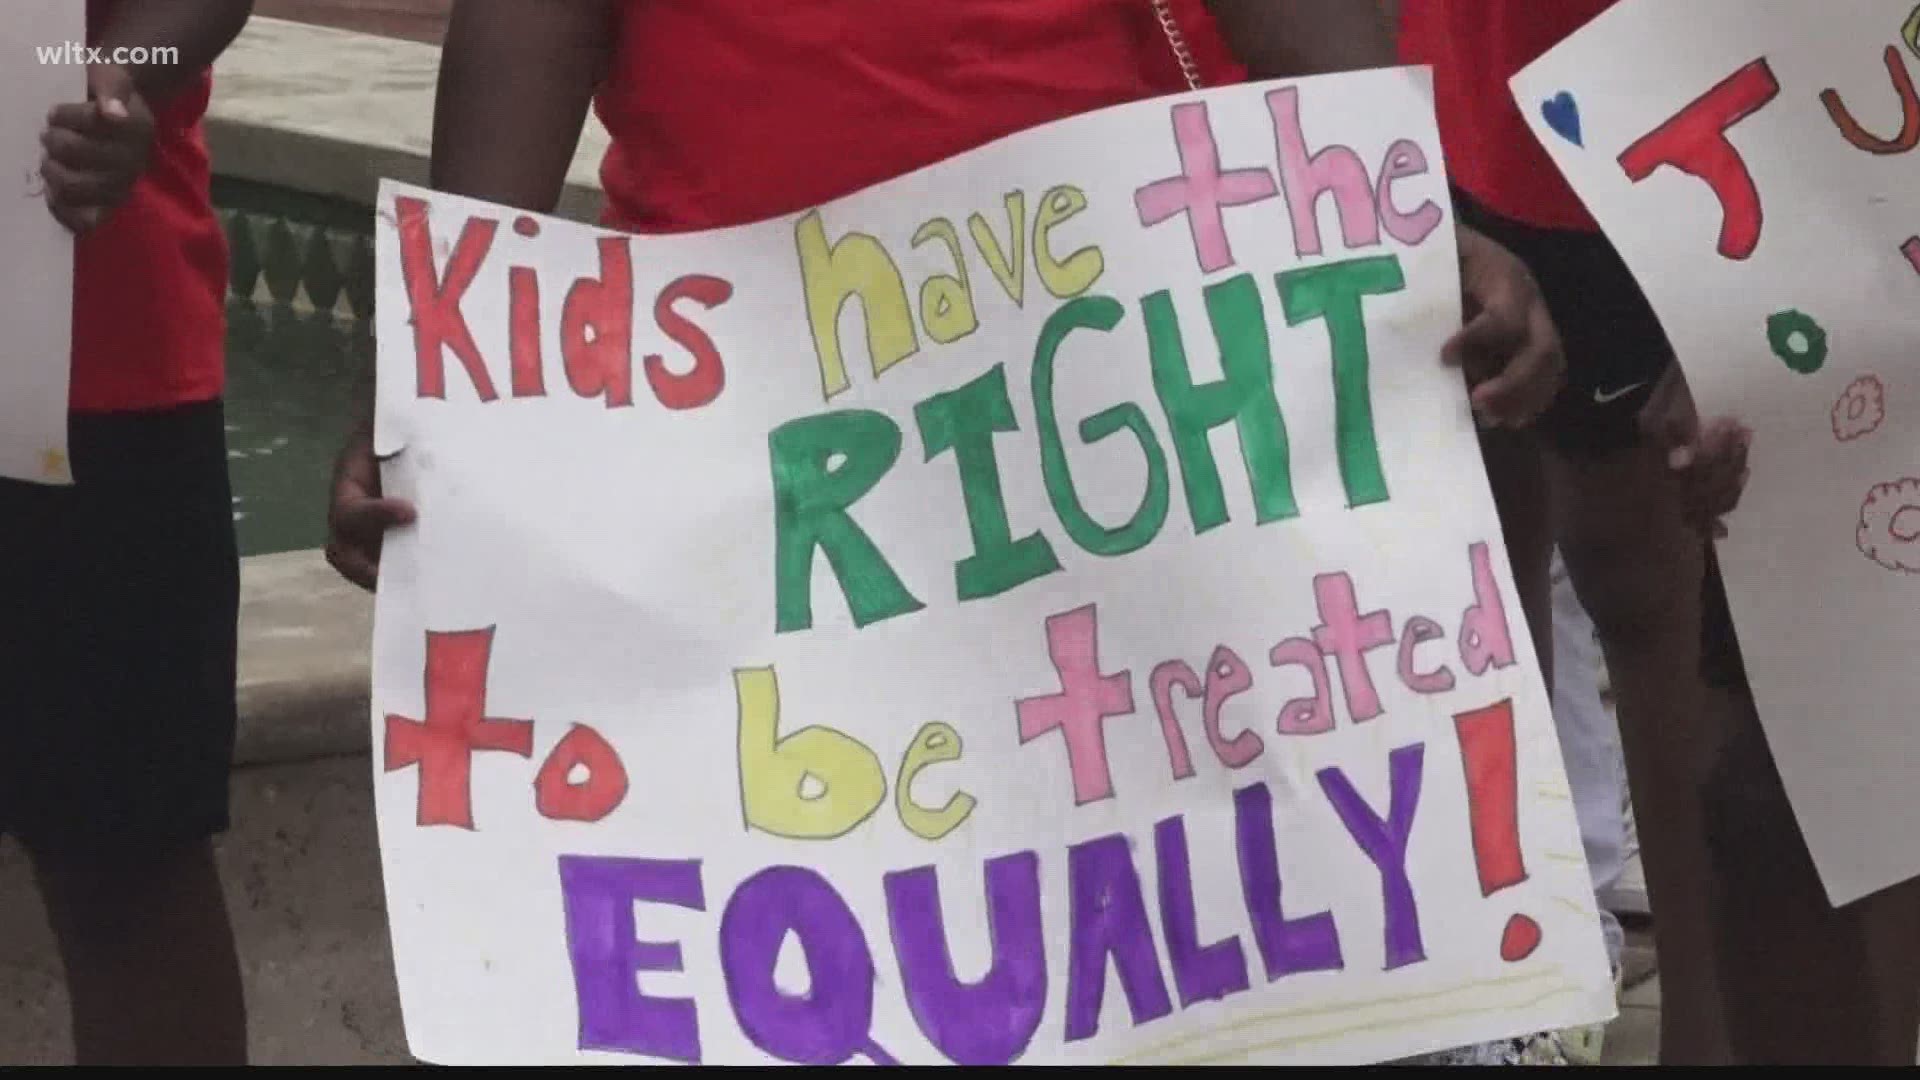 More than 30 students in the "Why not Young Lives' camp marched to the Orangeburg County Courthouse to voice opinions on what they would like to change in the county